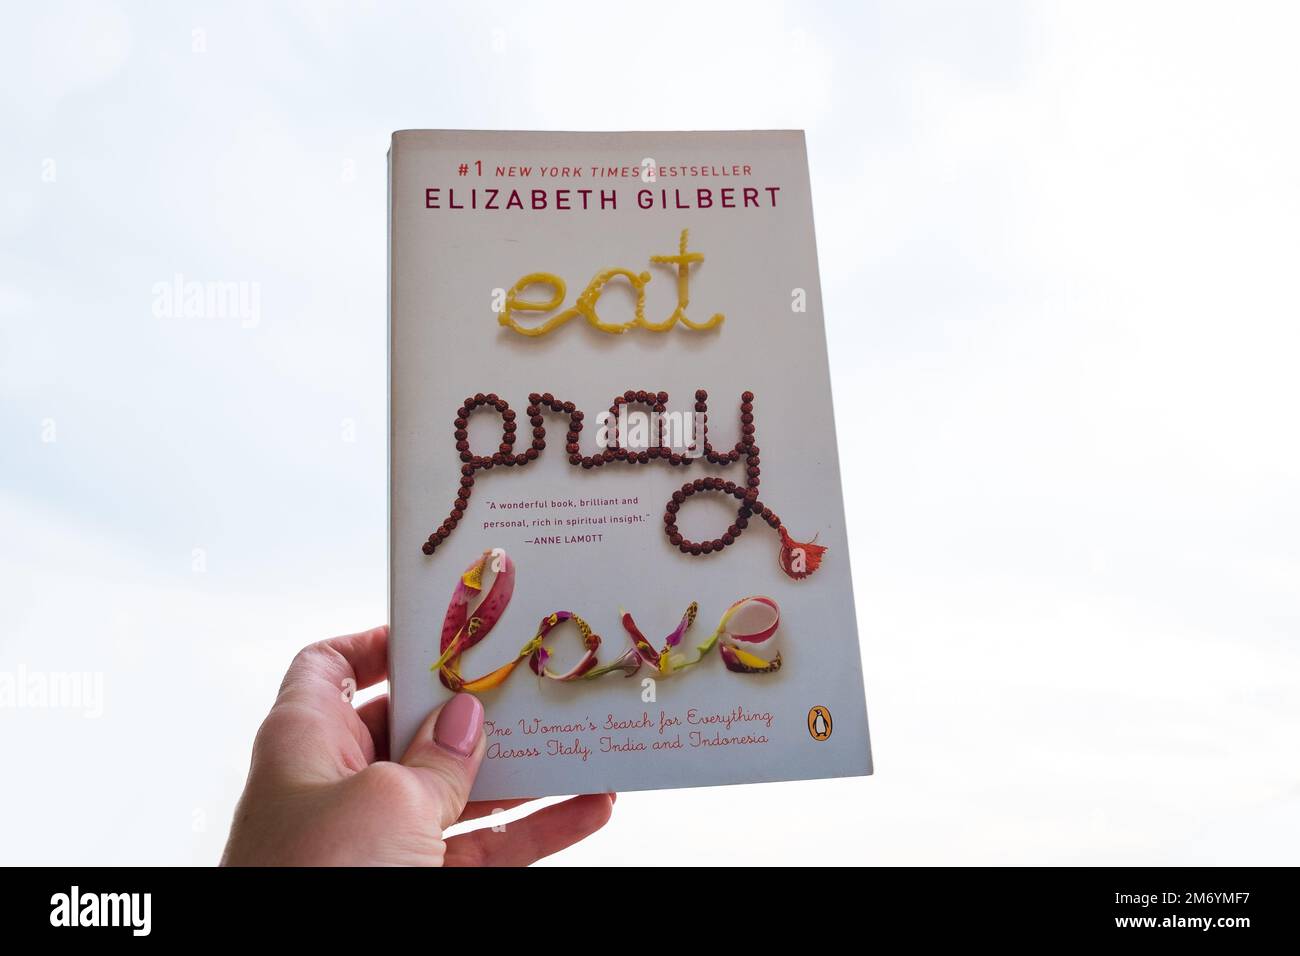 Milano, Italy - May 4, 2022: Hand holding New York Times bestseller by Elizabeth Gilbert 'Eat. Pray. Love'. Stock Photo